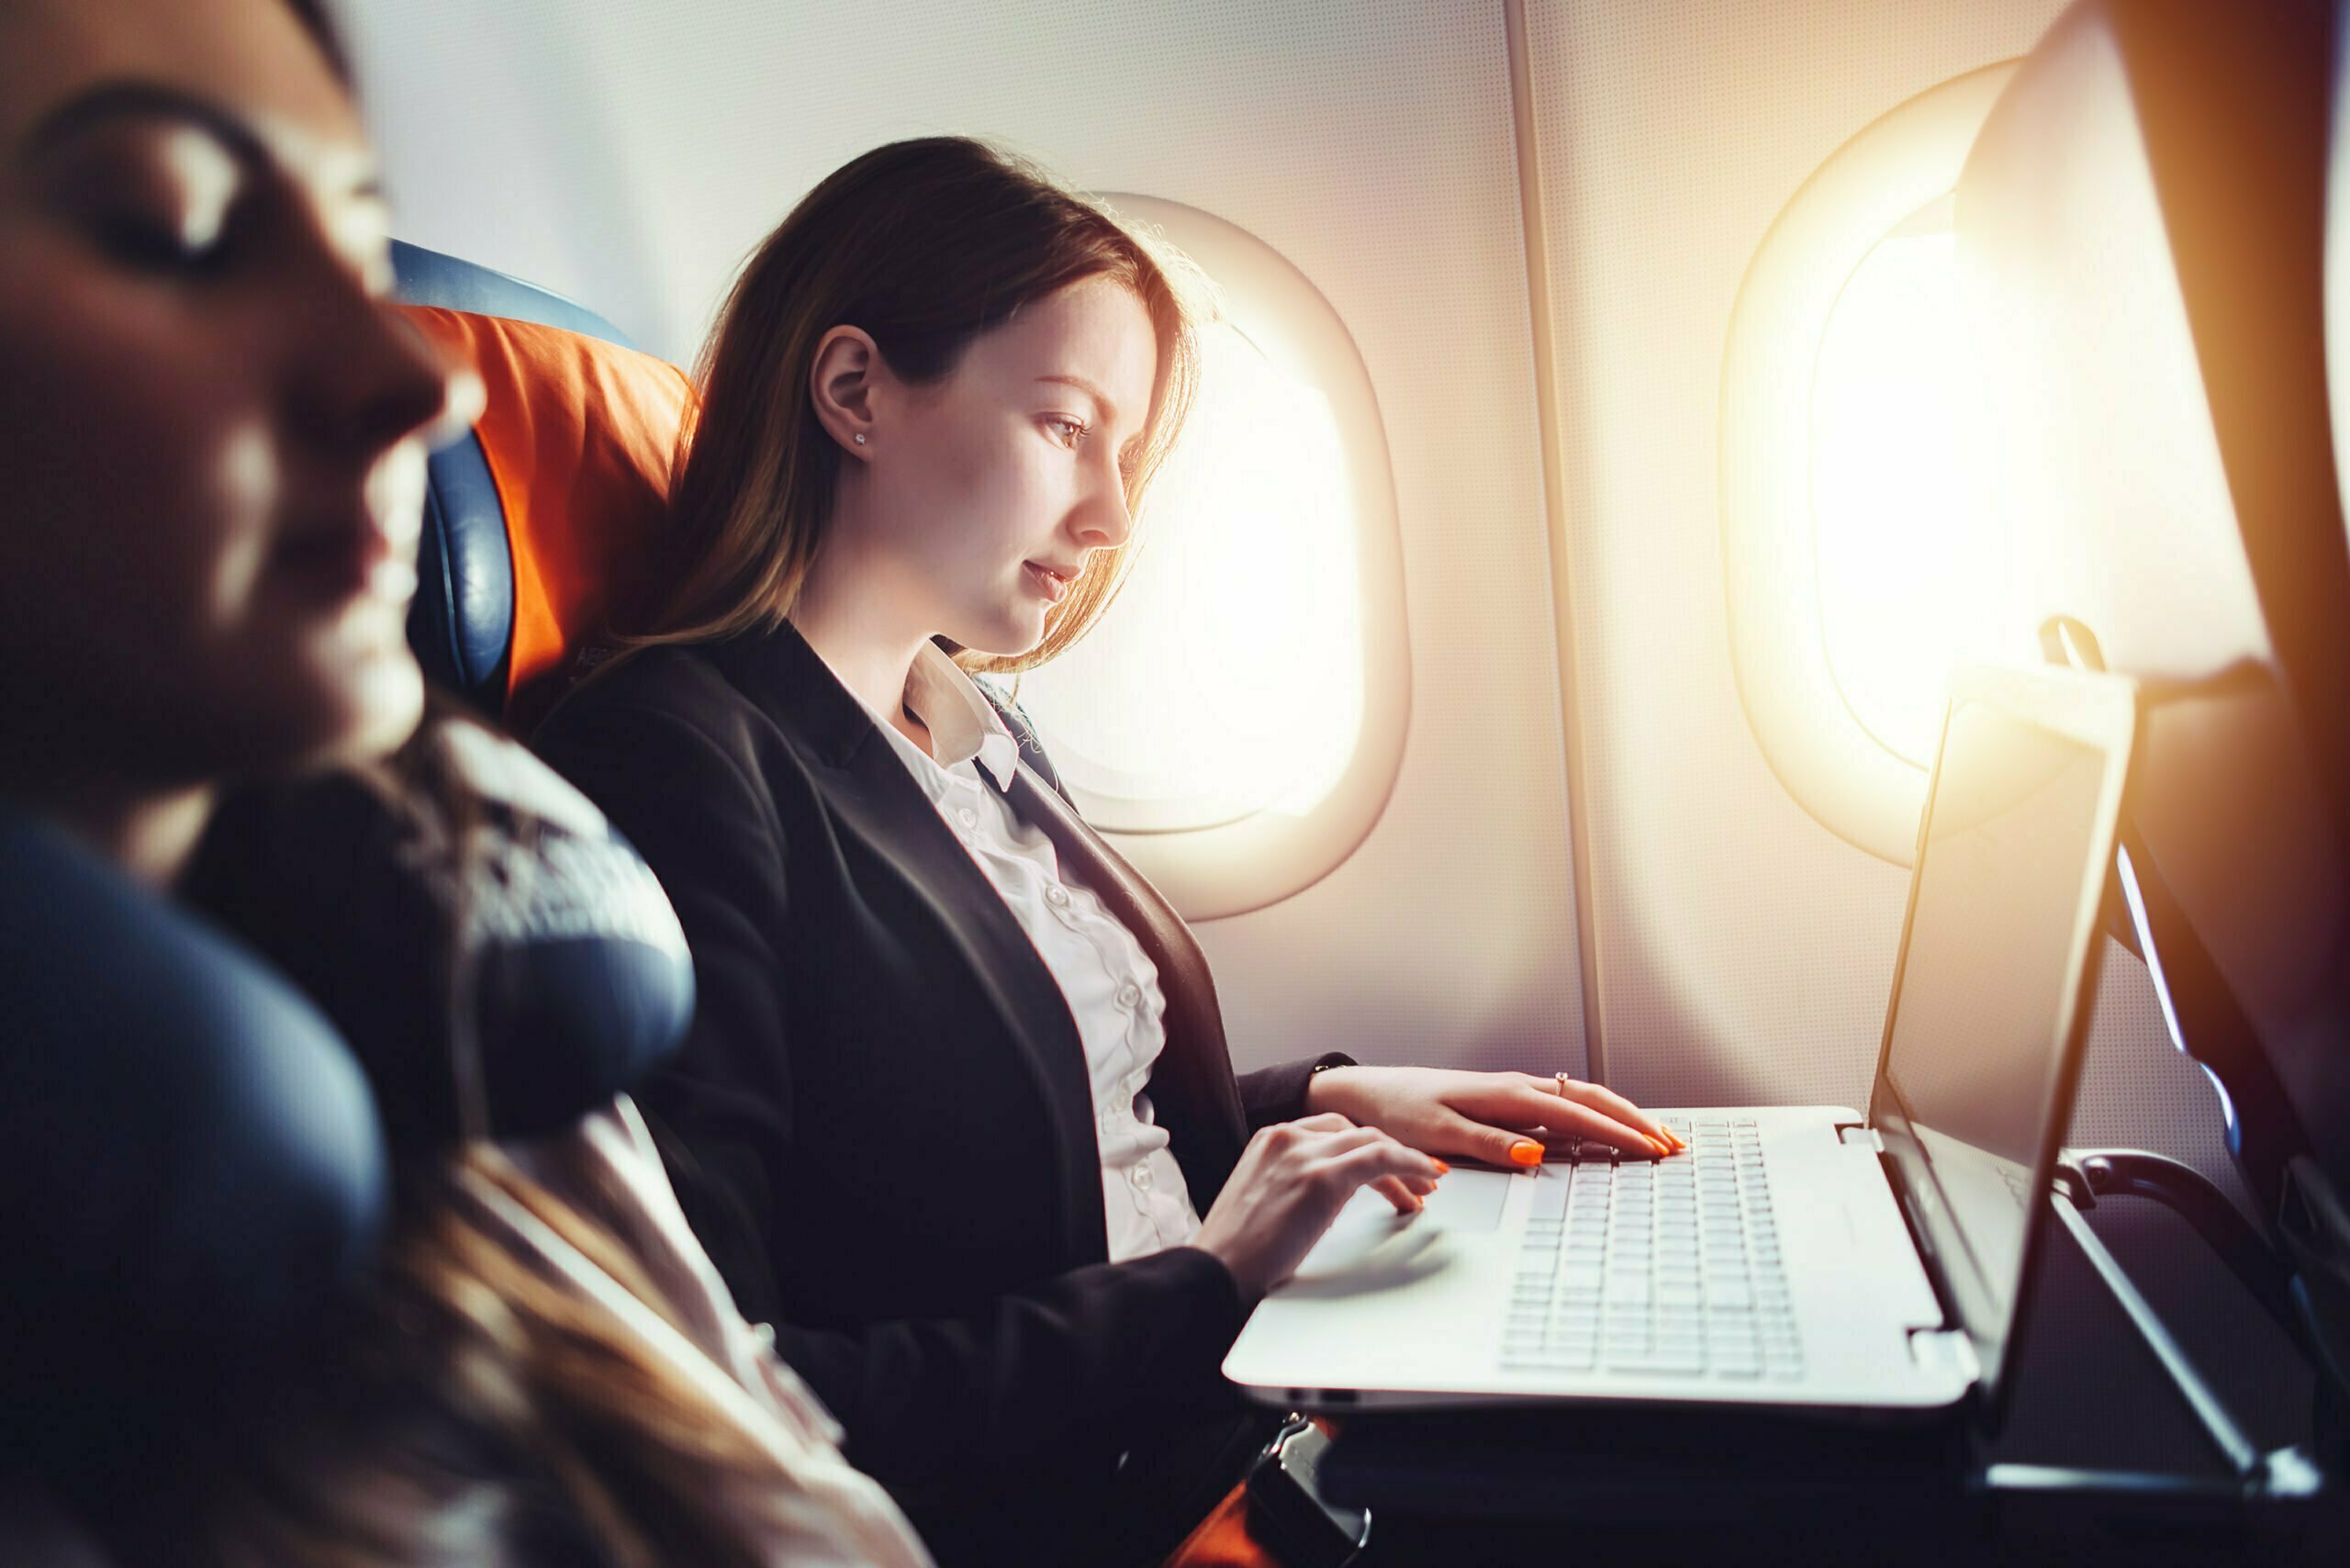 Corporate traveller working on laptop sitting near window in an airplane